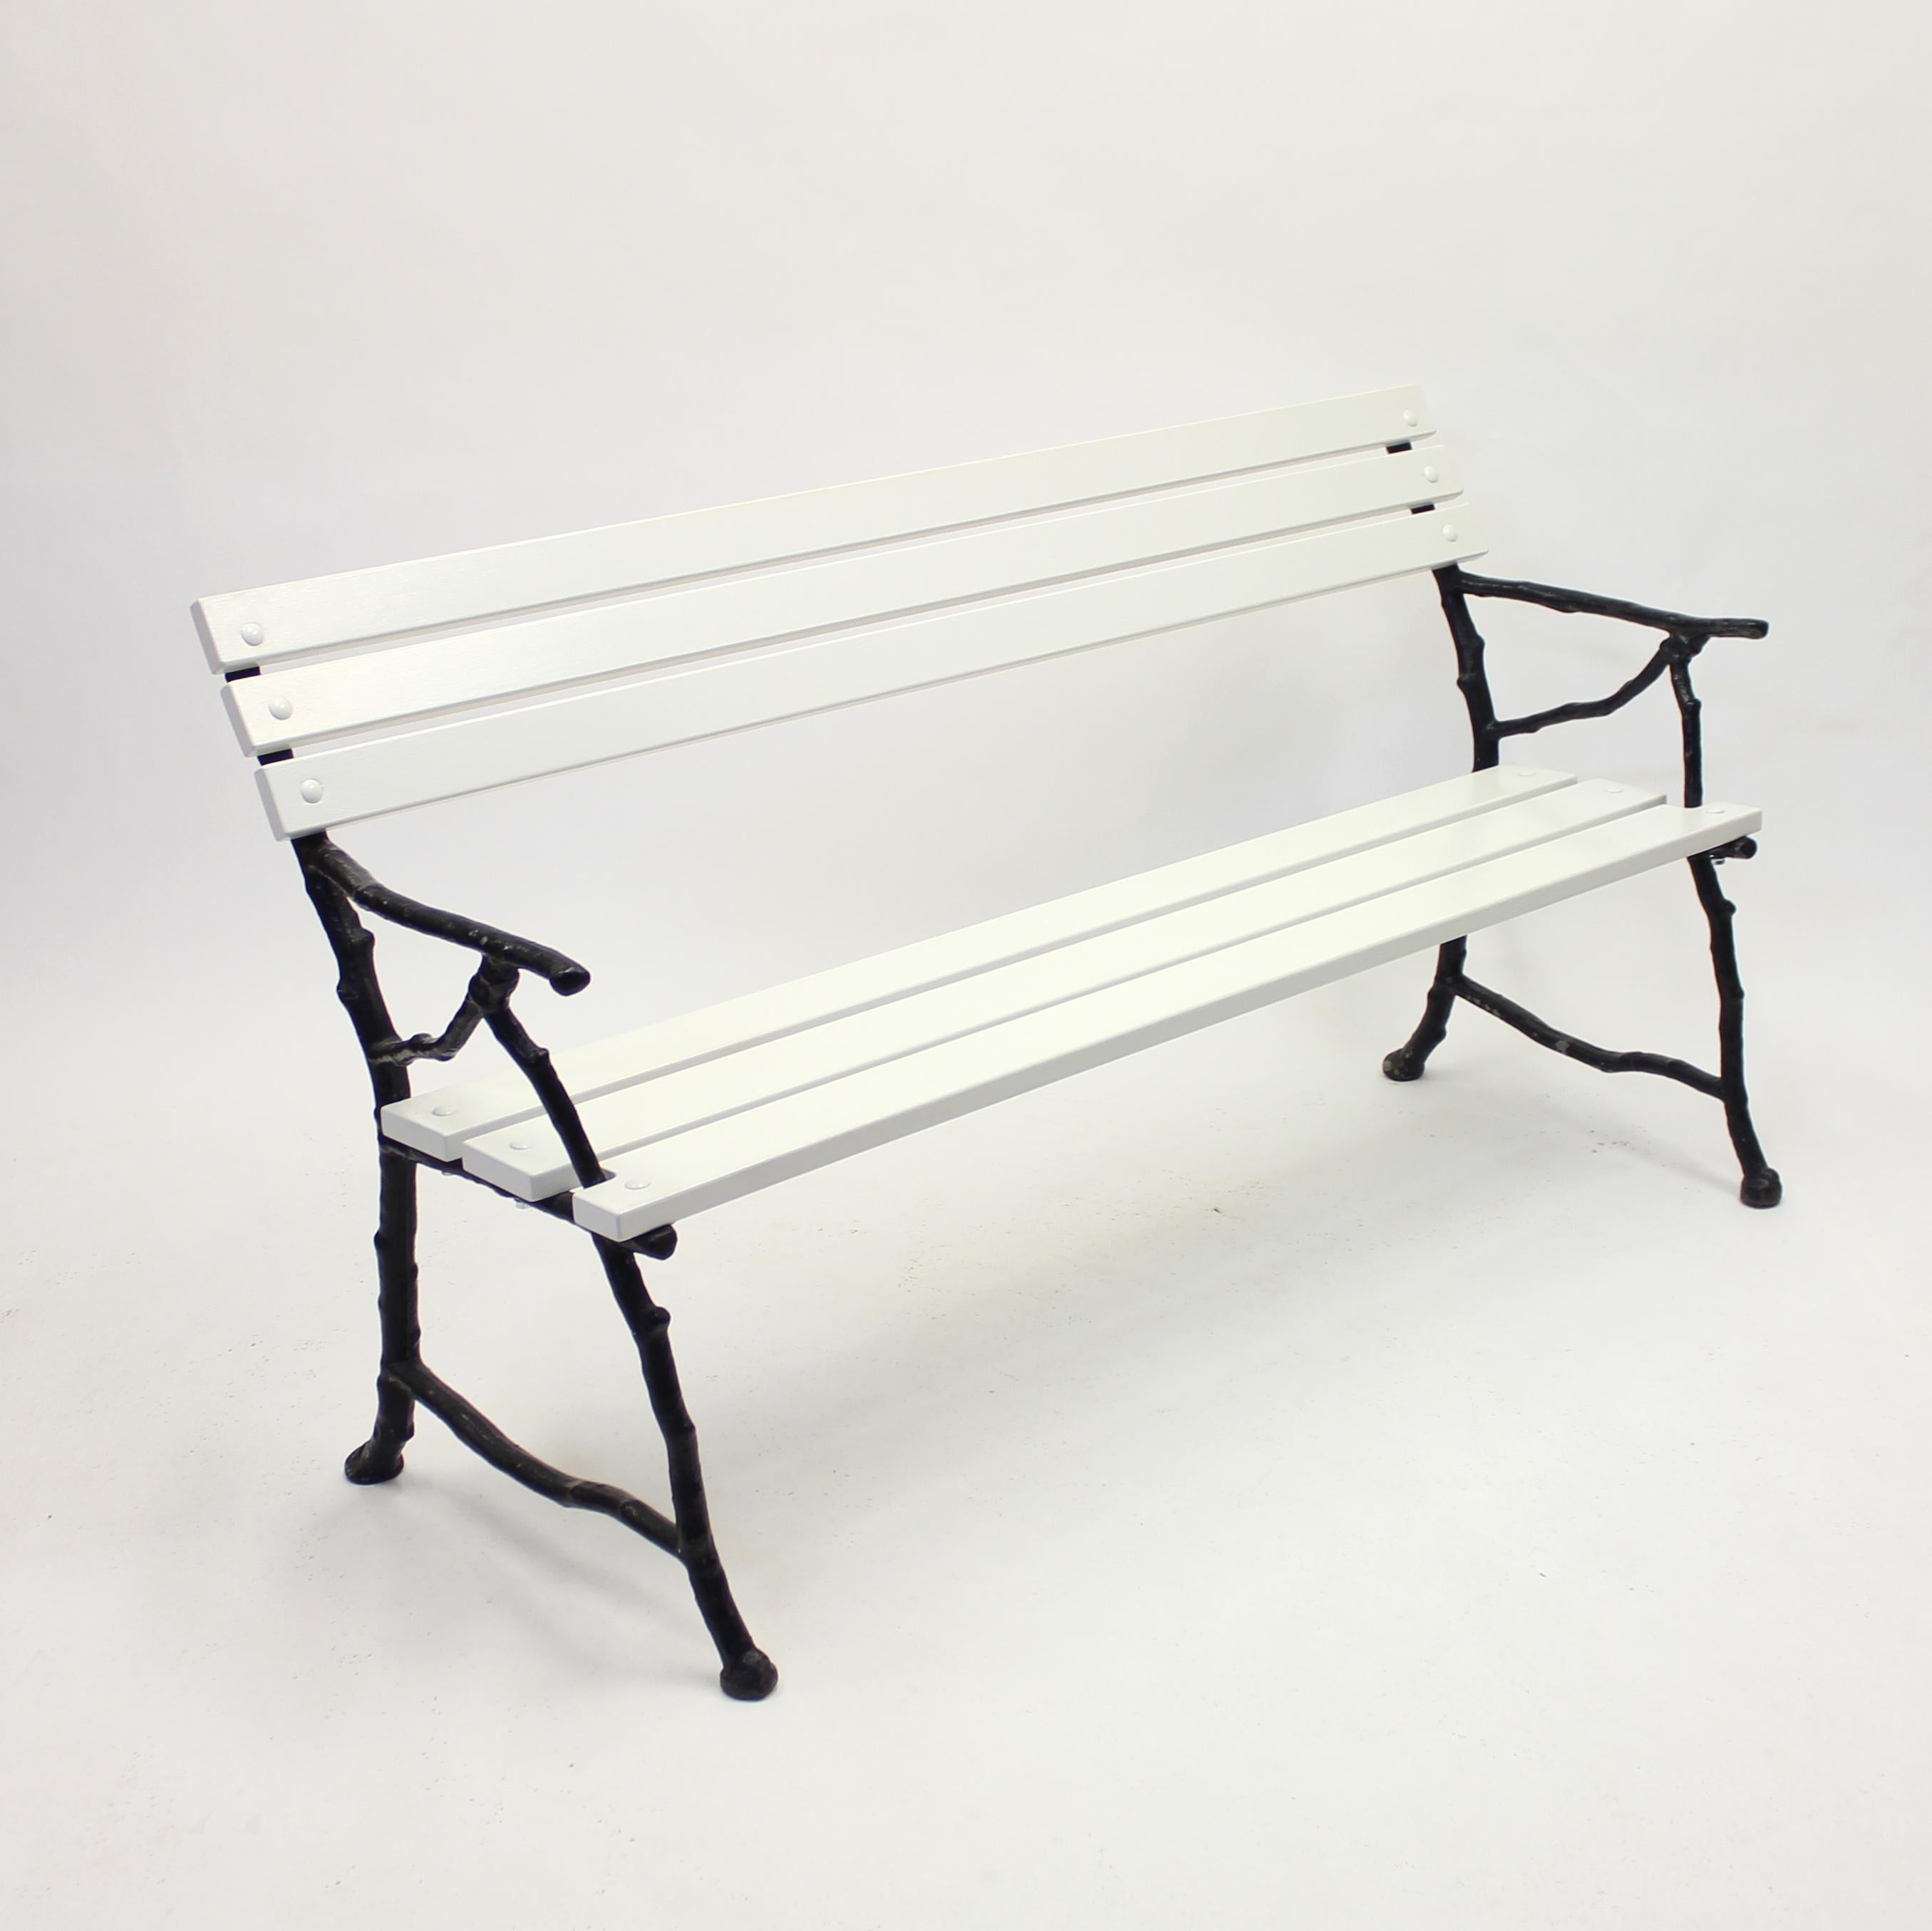 Swedish cast iron garden sofa with white painted wooden plank seat and back. The black cast iron frame, depicting tree branches, is from the early 20th century. The seat and back are totally restored with new wood and new screws to keep this piece